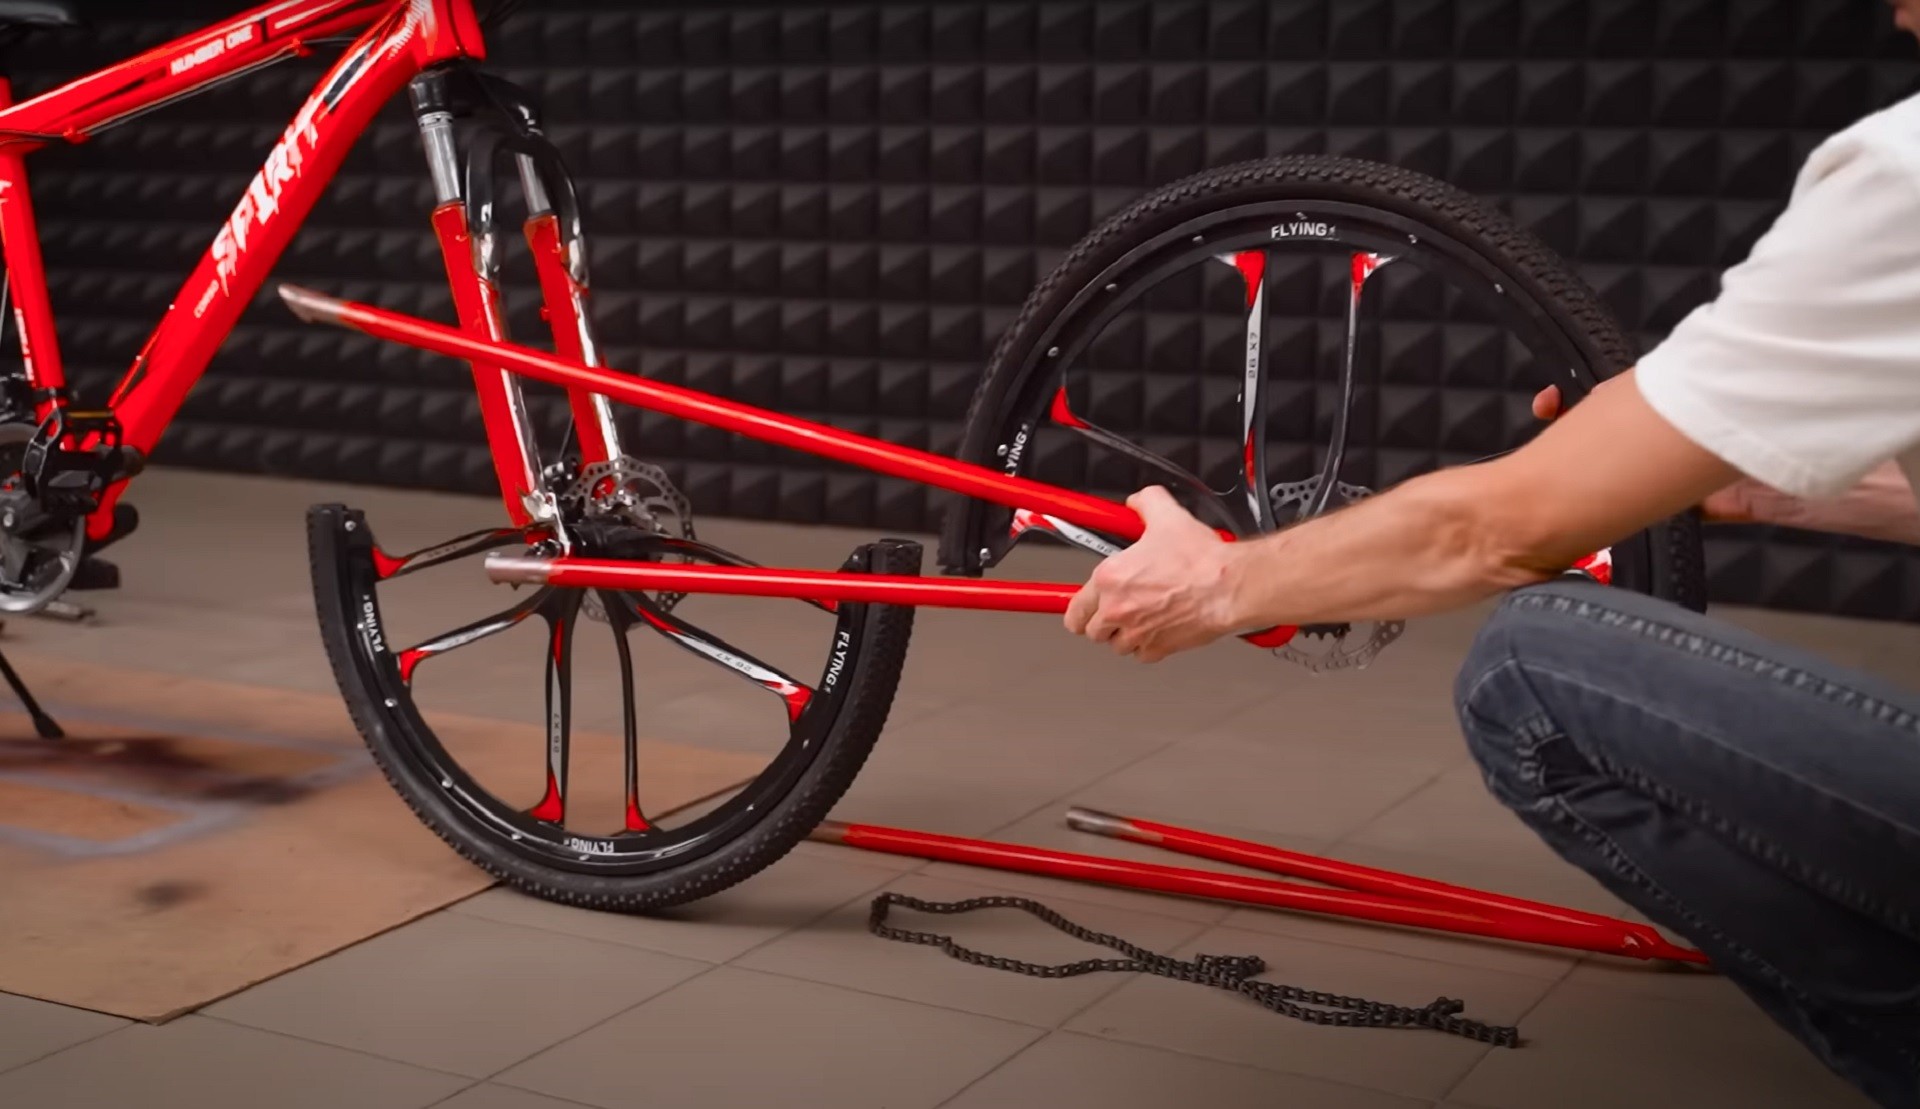 this split wheel vehicle is probably the most overcomplicated pedal cycle design out there 3